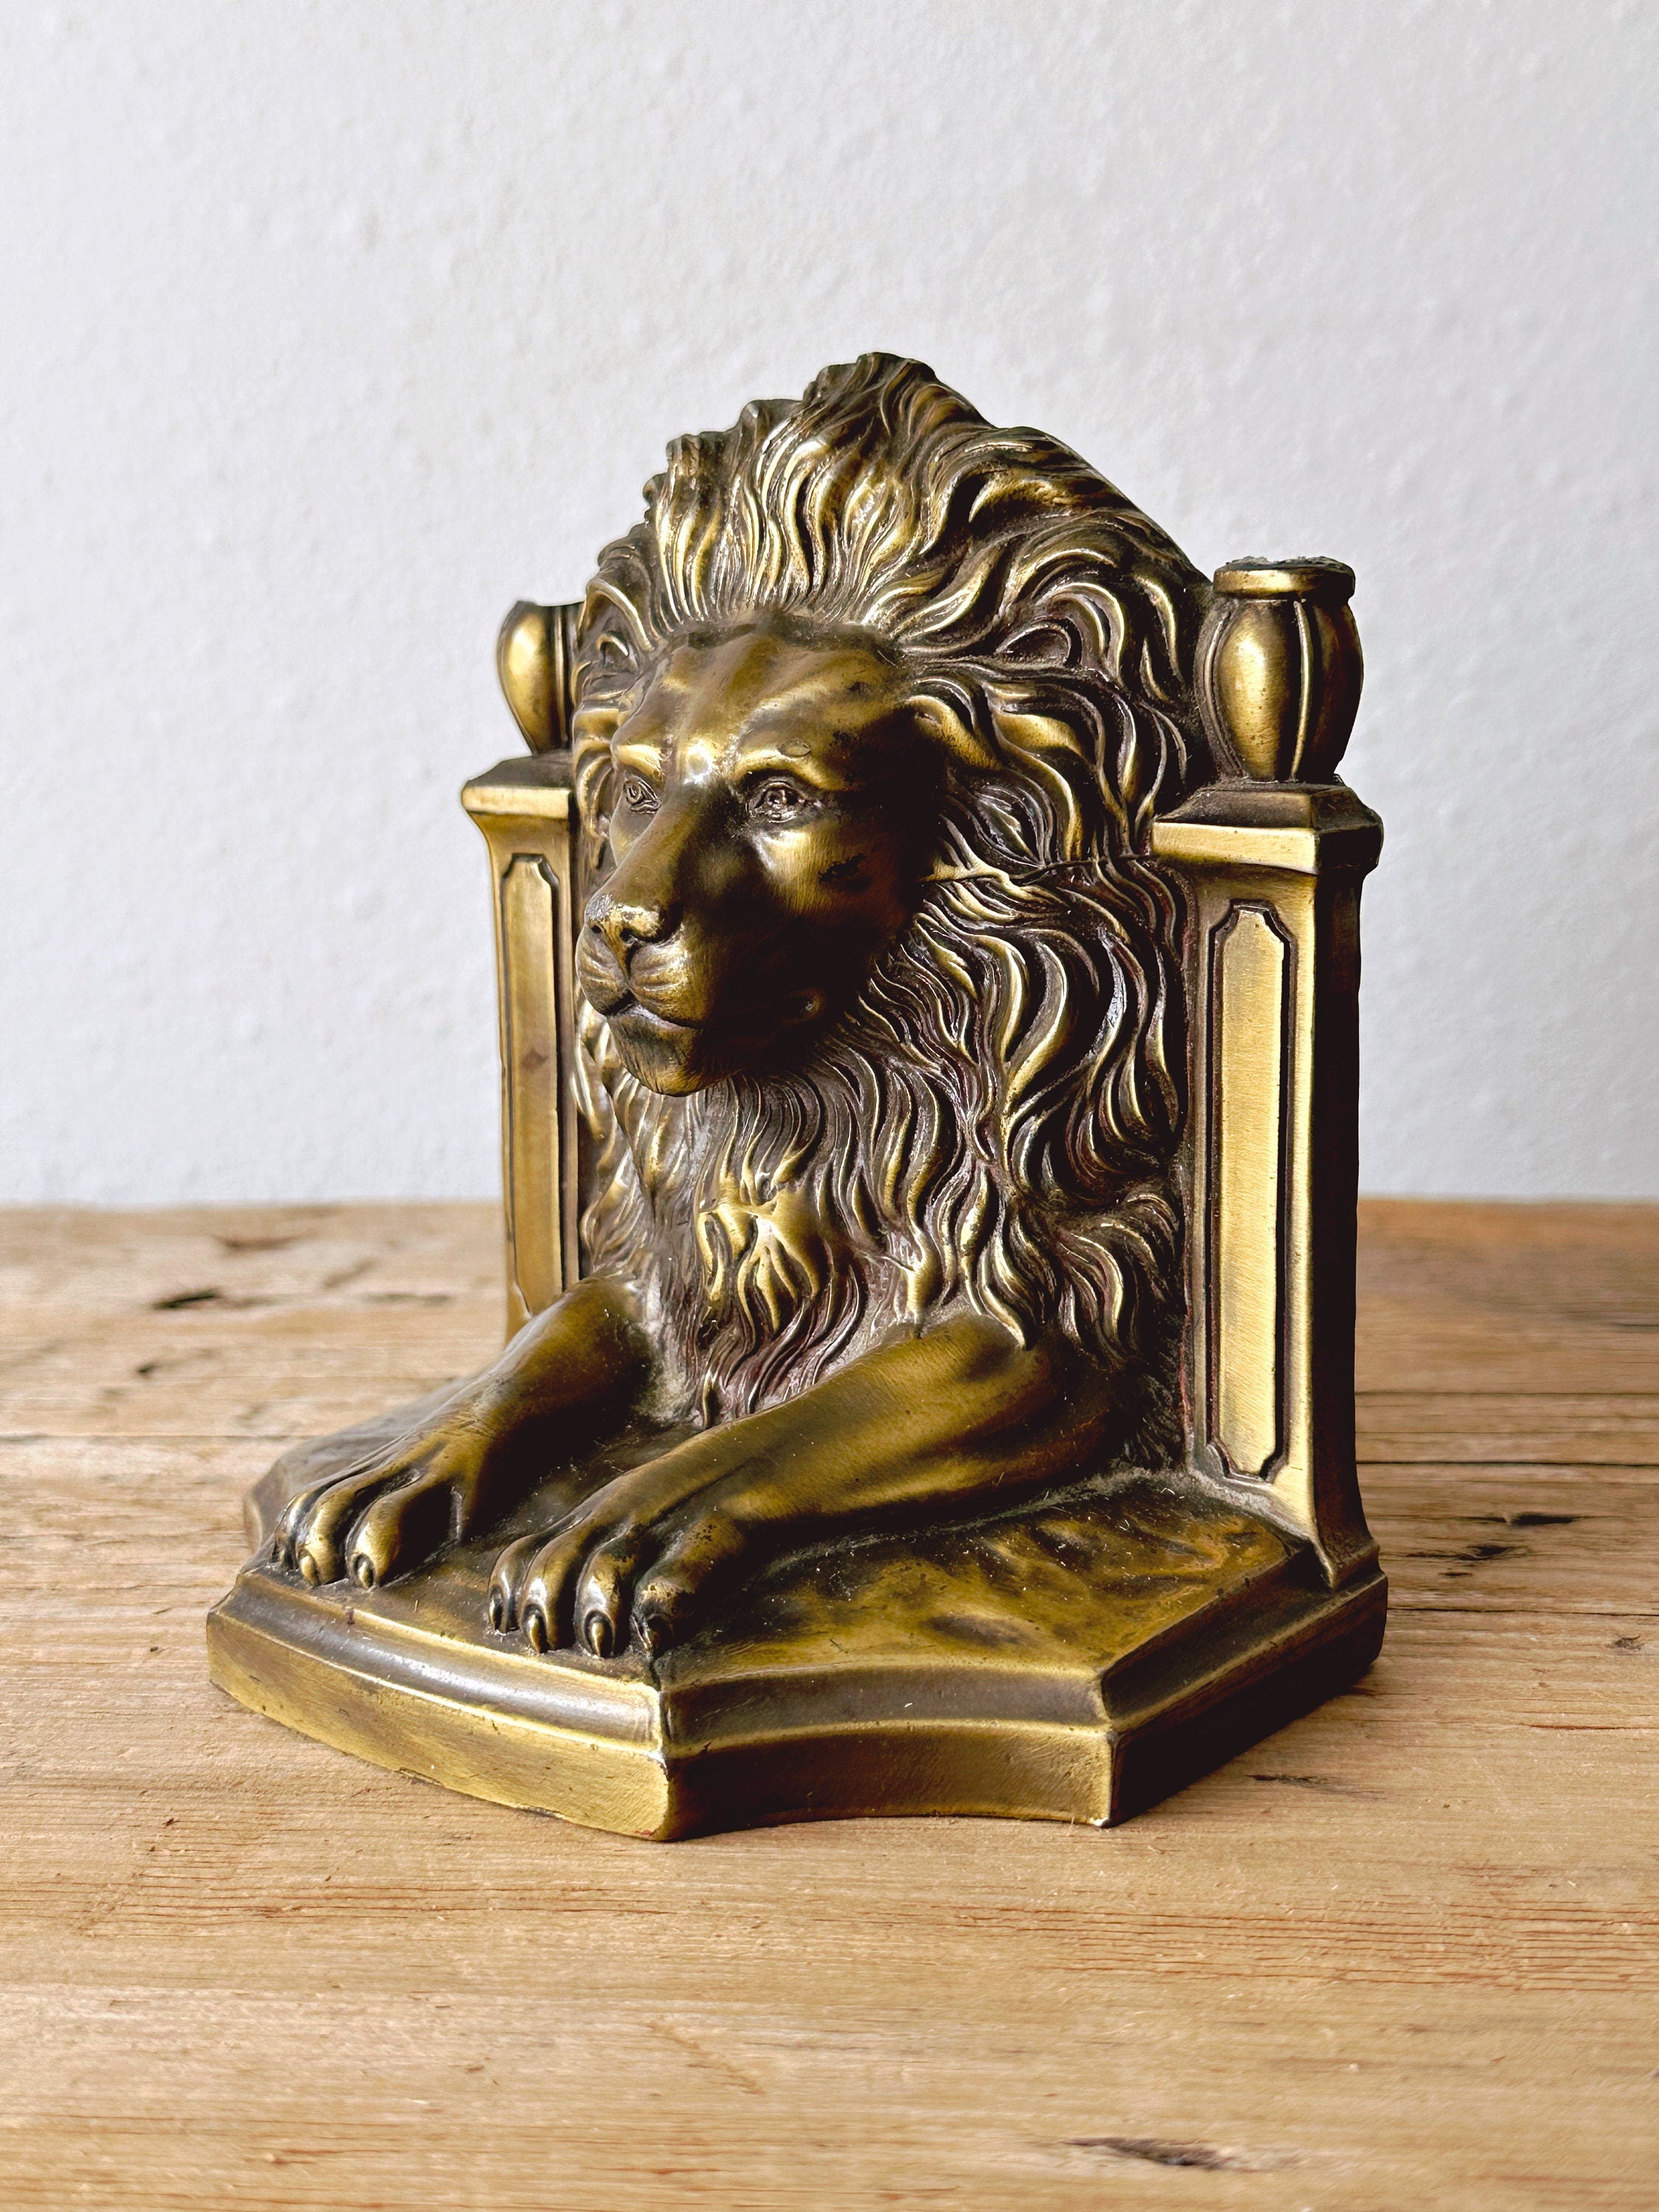 Vintage Lions Head Bookend in Antique Brass Finish by PM Craftsman | SINGLE | Gold Metal Lion Ornate Bust Library and Office Decor